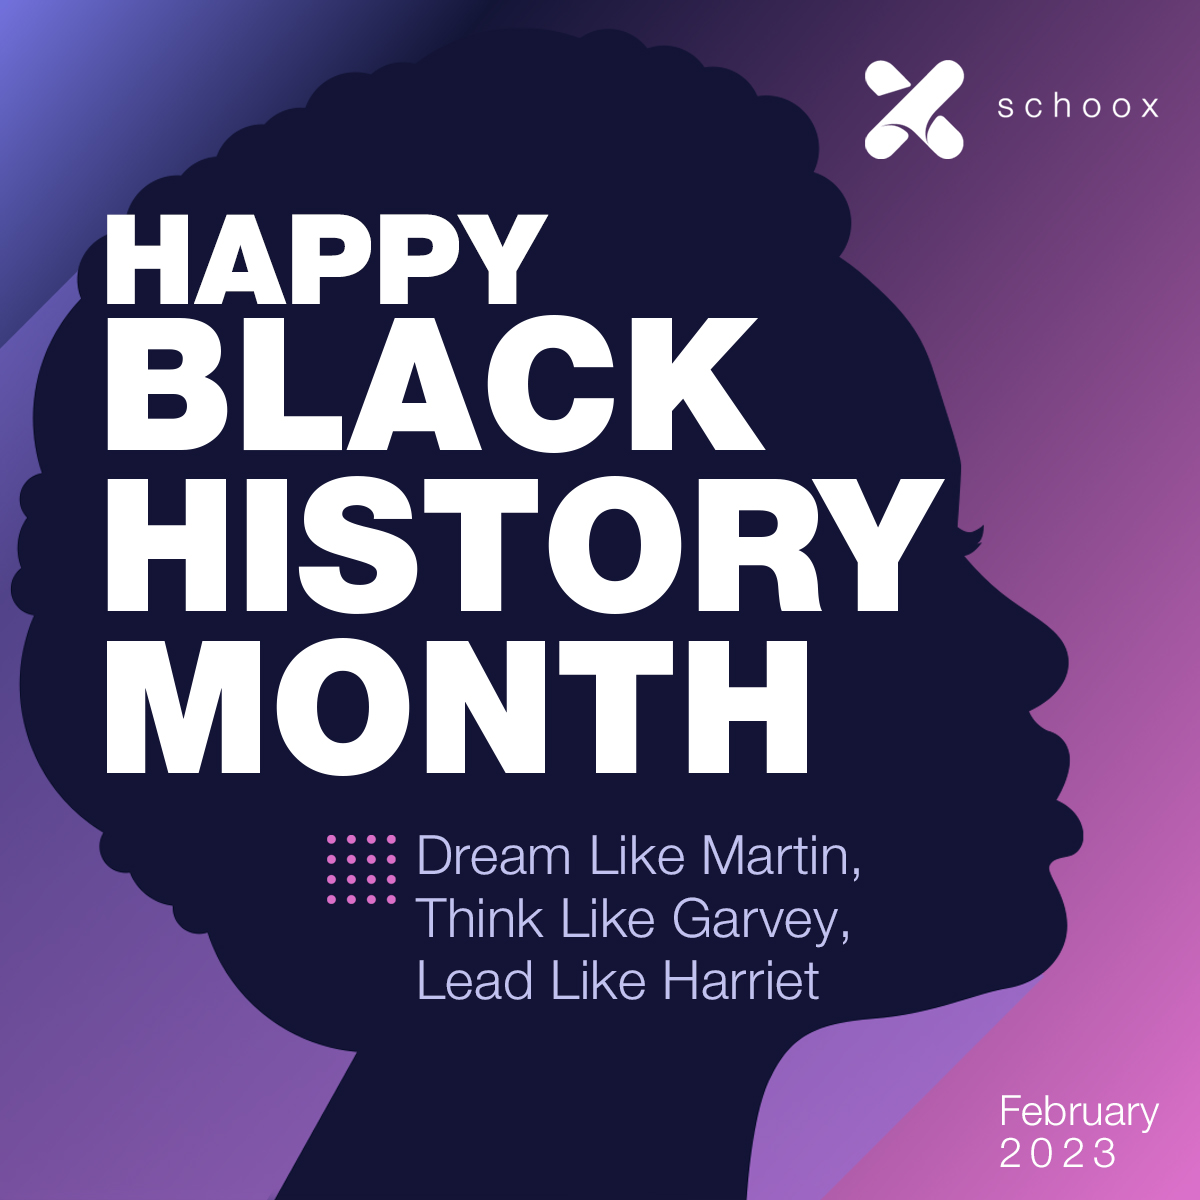 Happy Black History Month! It is a time to reflect on and celebrate the achievements and contributions of Black Americans and honor their central role in U.S. history.